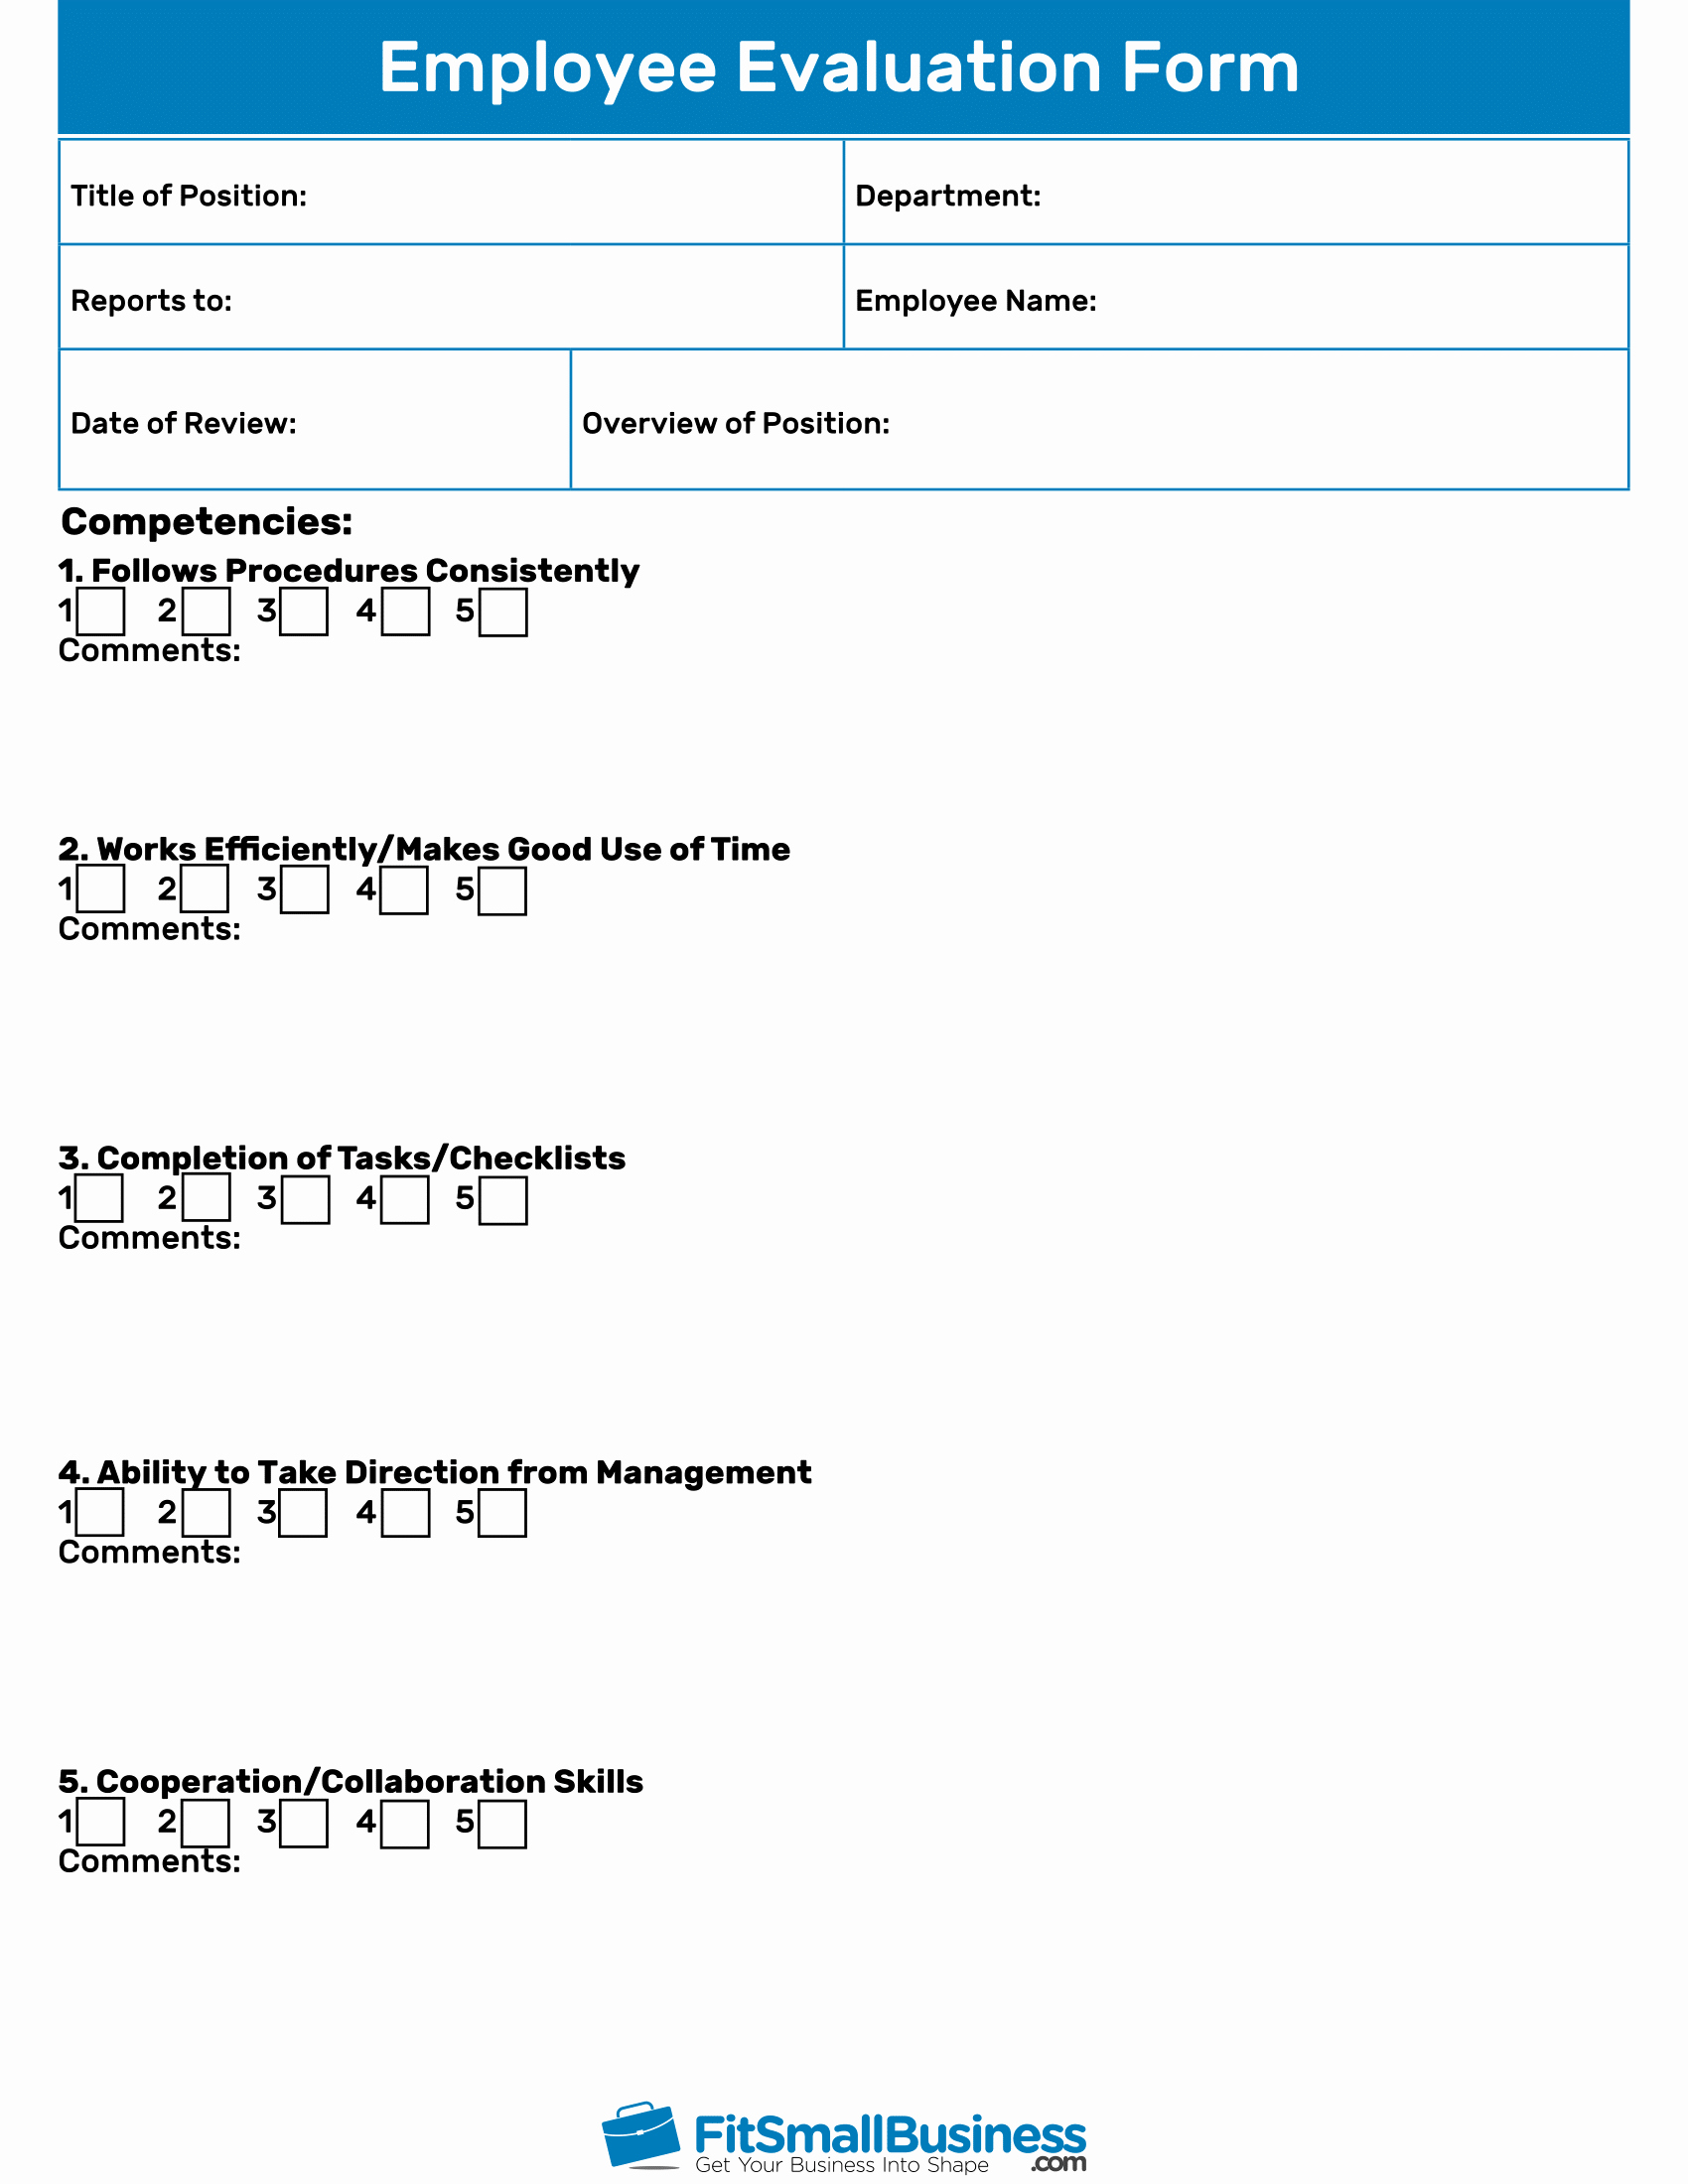 Free Employee Evaluation forms Templates Unique Employee Evaluation forms [ Free Performance Review Templates]